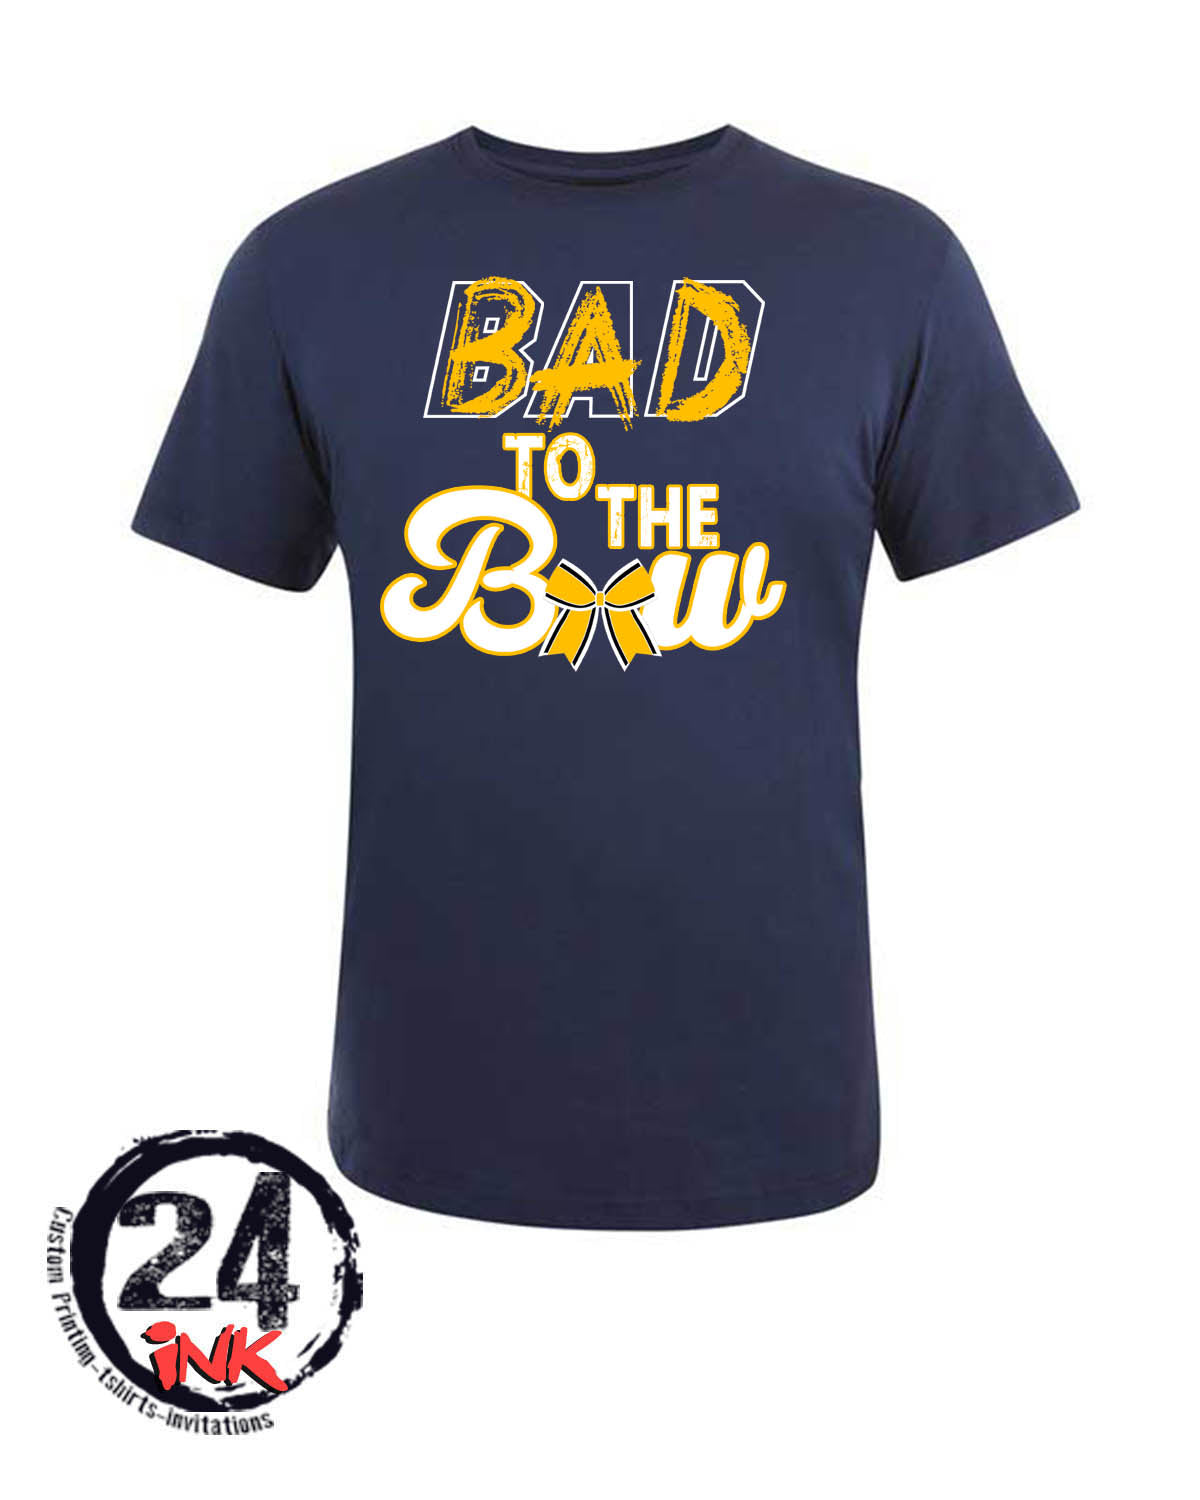 Bad to the bow T-shirt